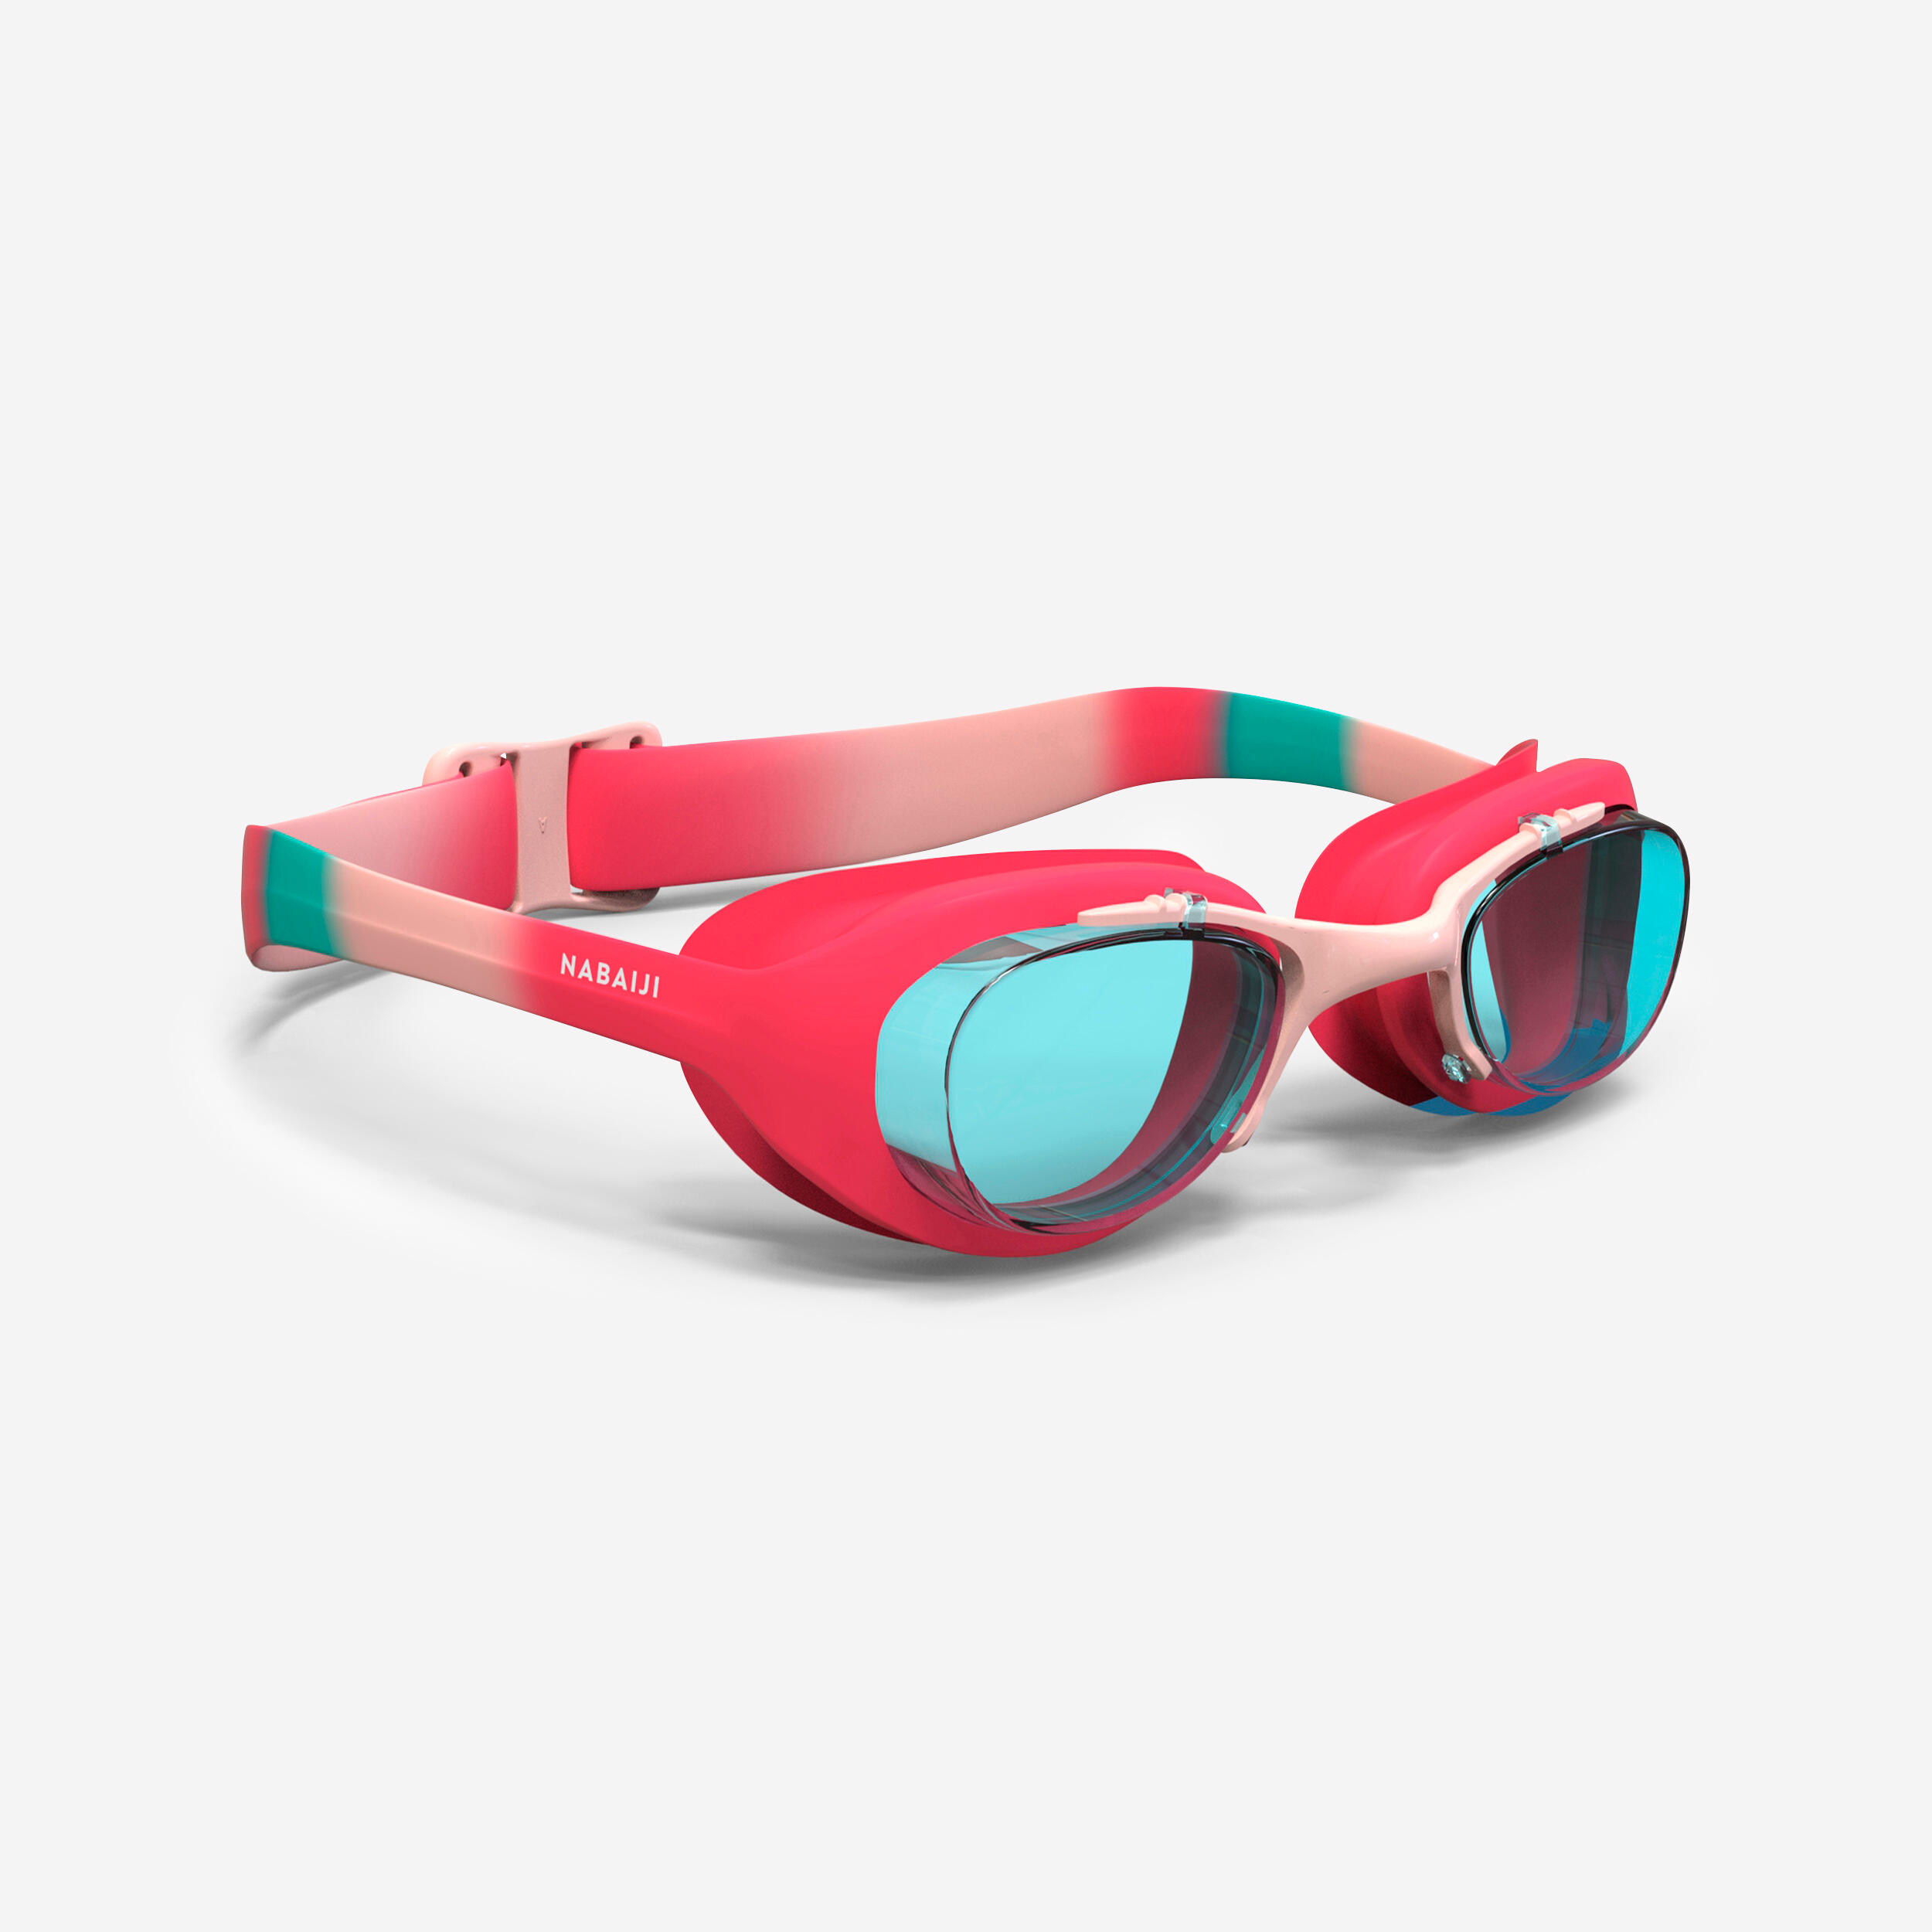 Swimming goggles XBASE - Clear lenses - Kids' size - Pink blue 1/6